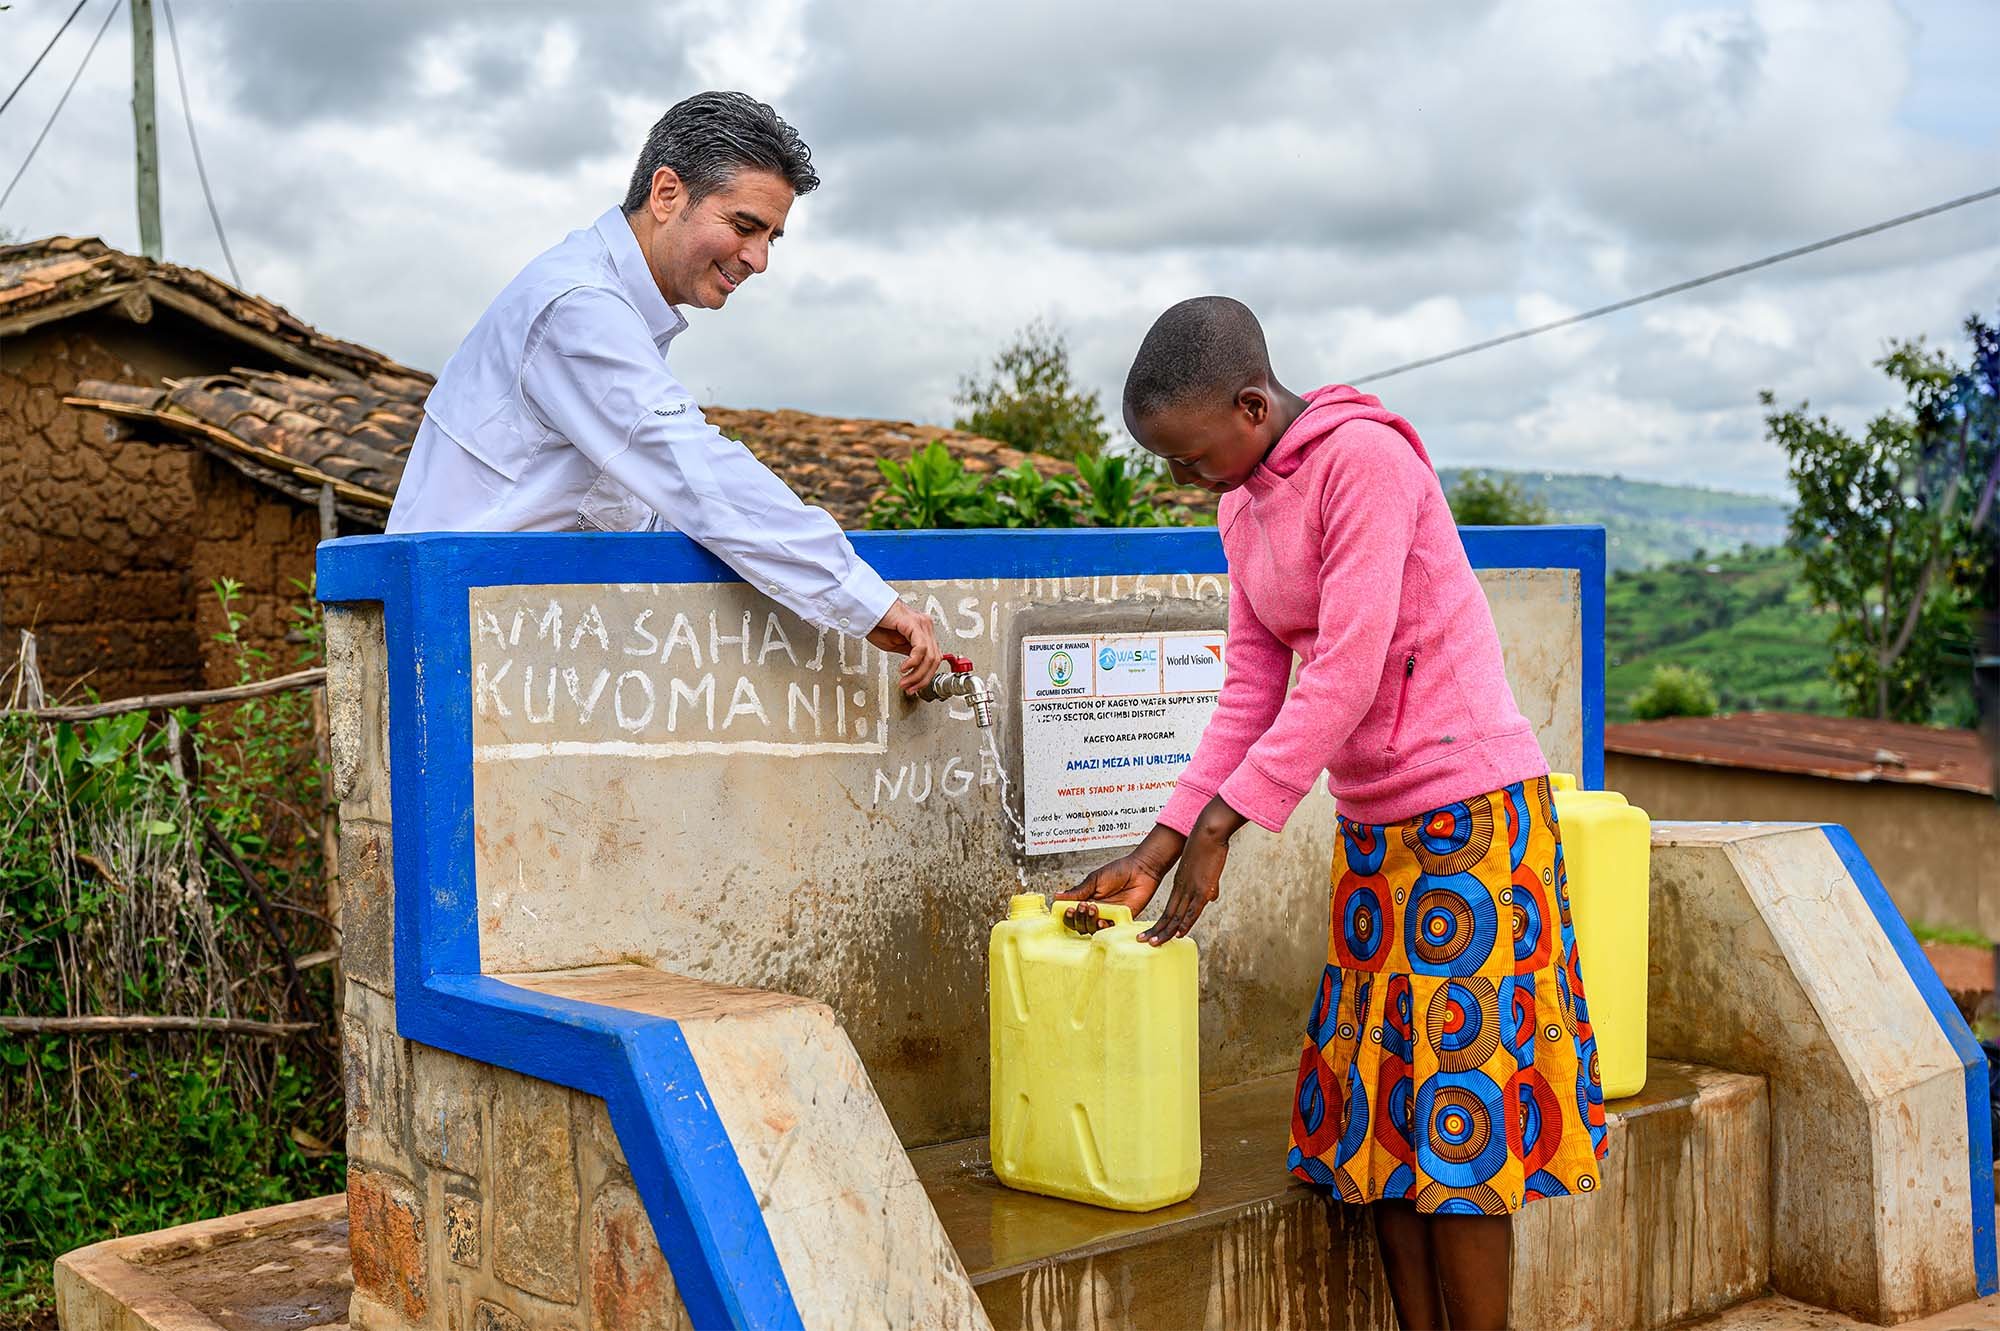 In Rwanda, a man smiles and stands behind a water tap, dispensing water into a container that a teenage girl is holding.